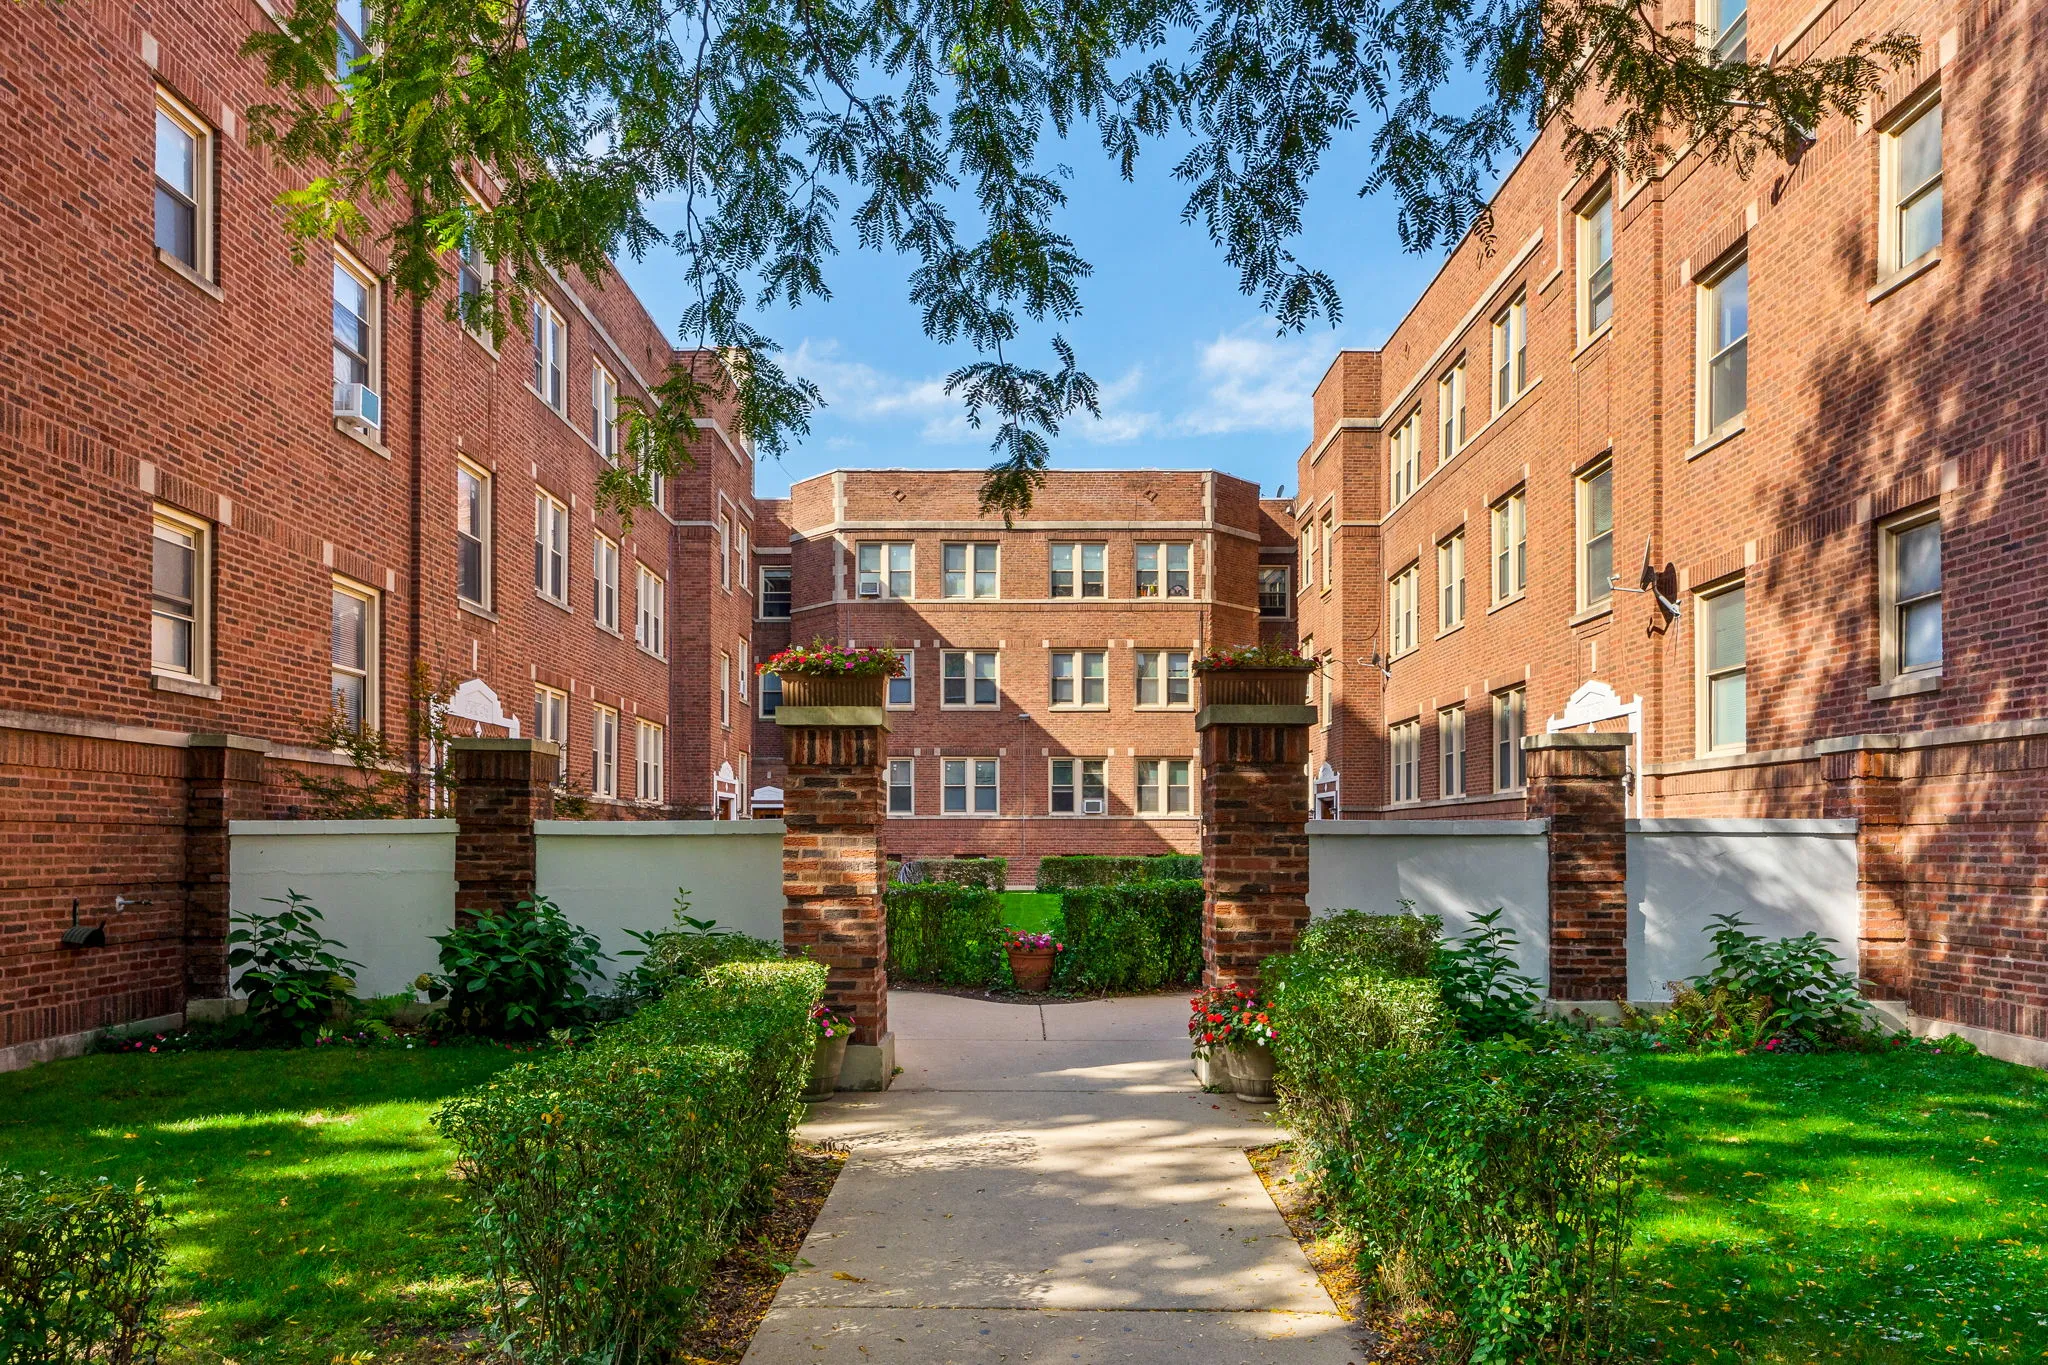 5900 N KENMORE AVE 60660-Uptown Kenmore-unit#002-B-Chicago-IL